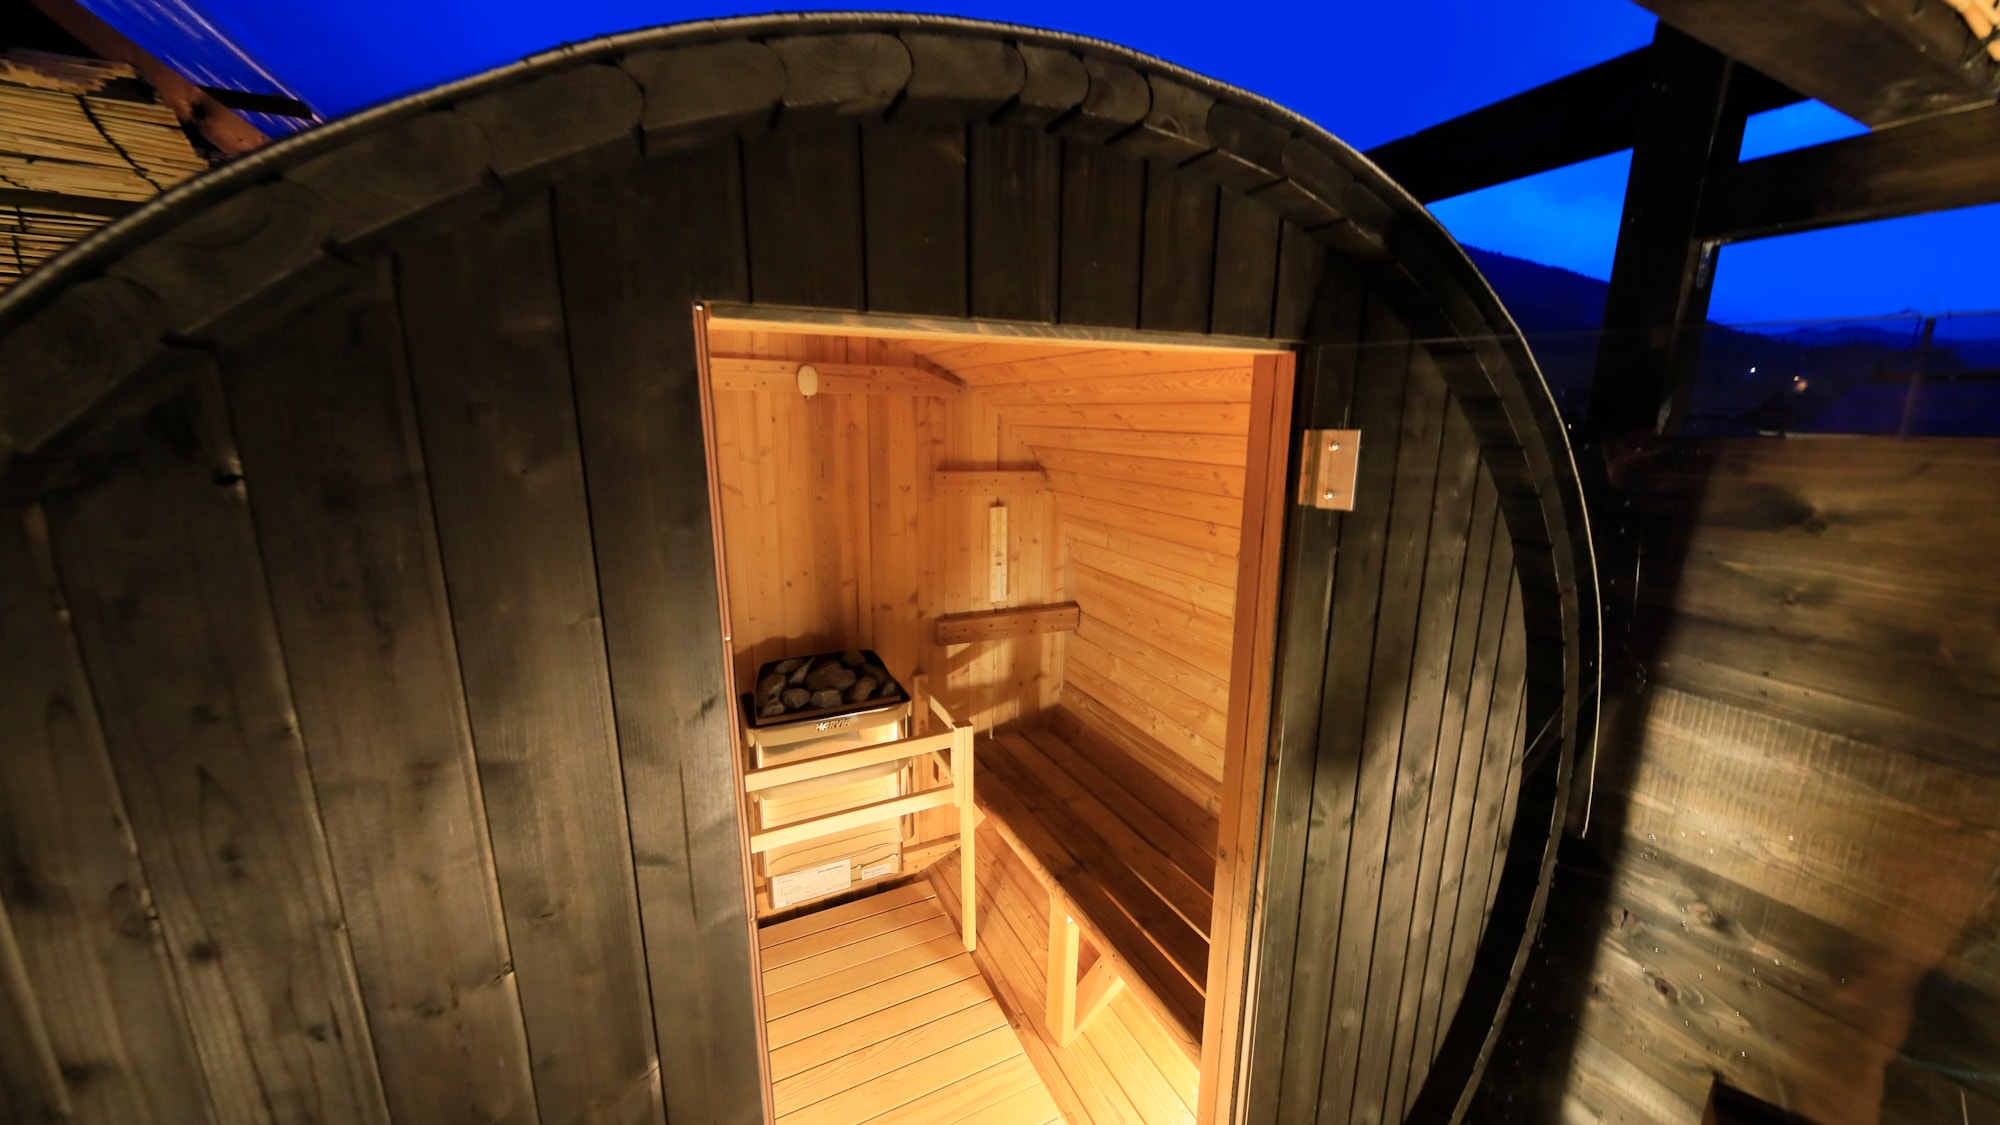 [Sauna image] The image shows a 4-person type, but the actual capacity is 2 people.